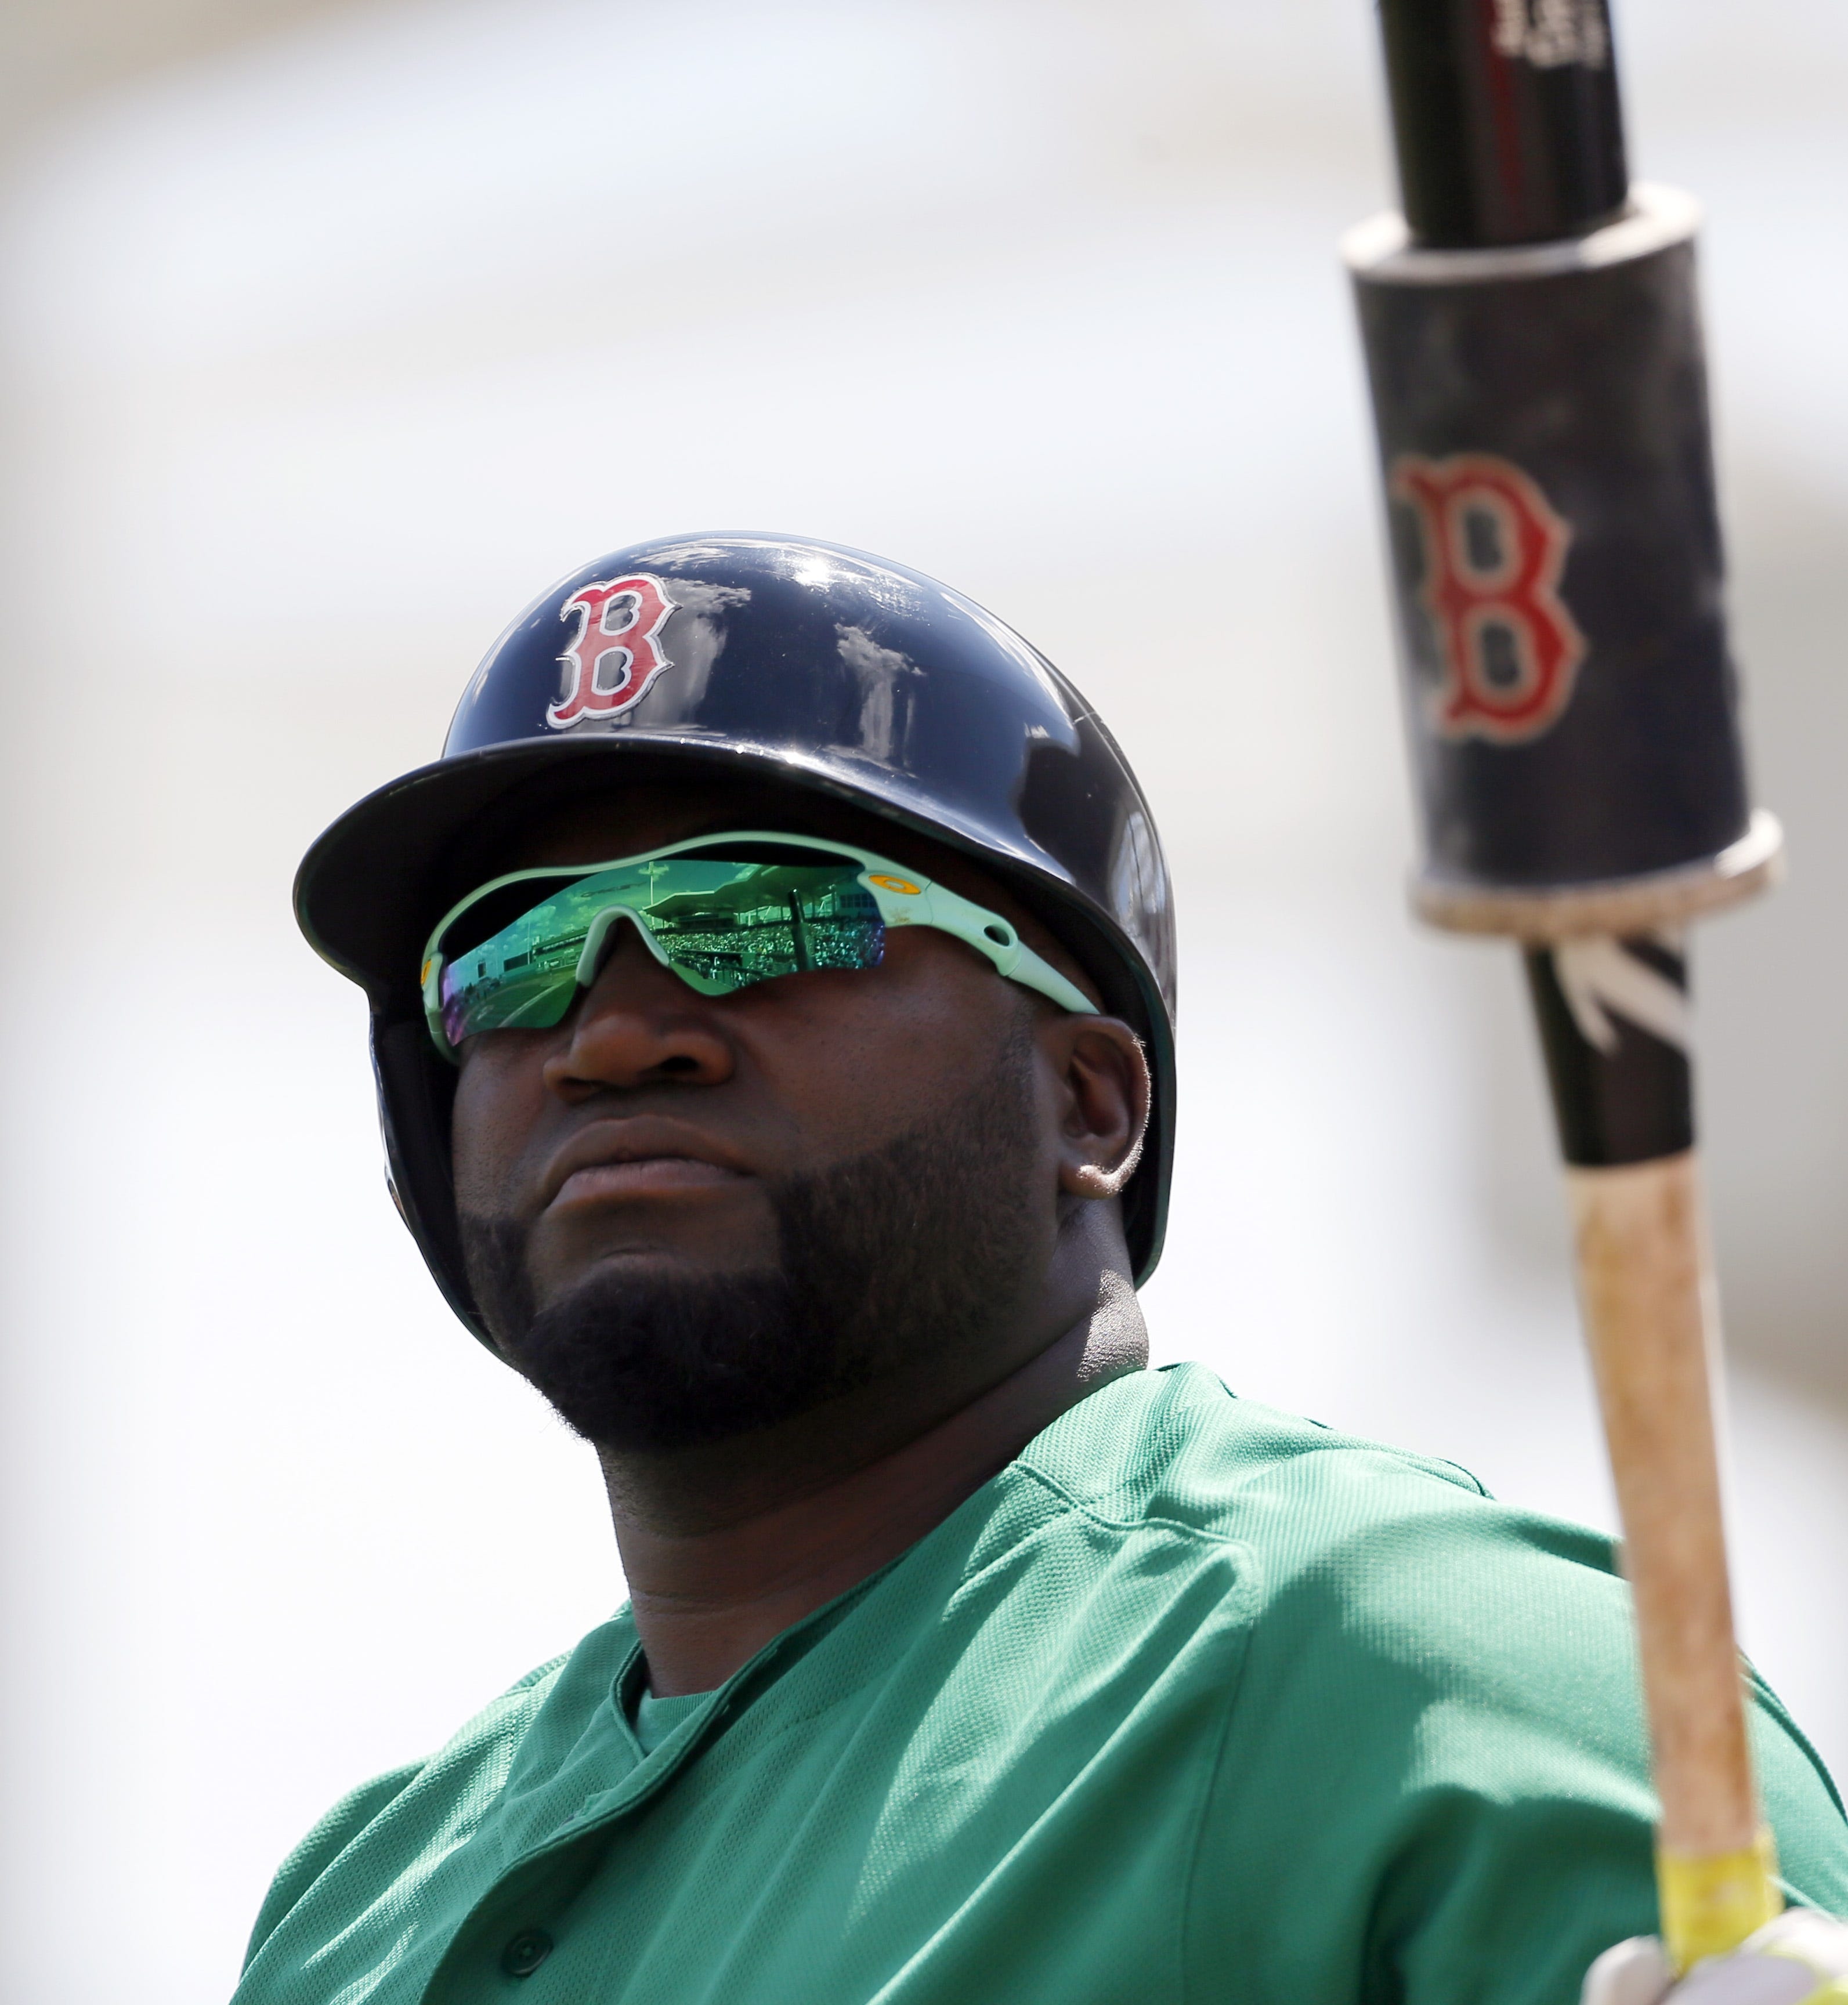 Red Sox: At 40, David Ortiz still among best hitters in the game